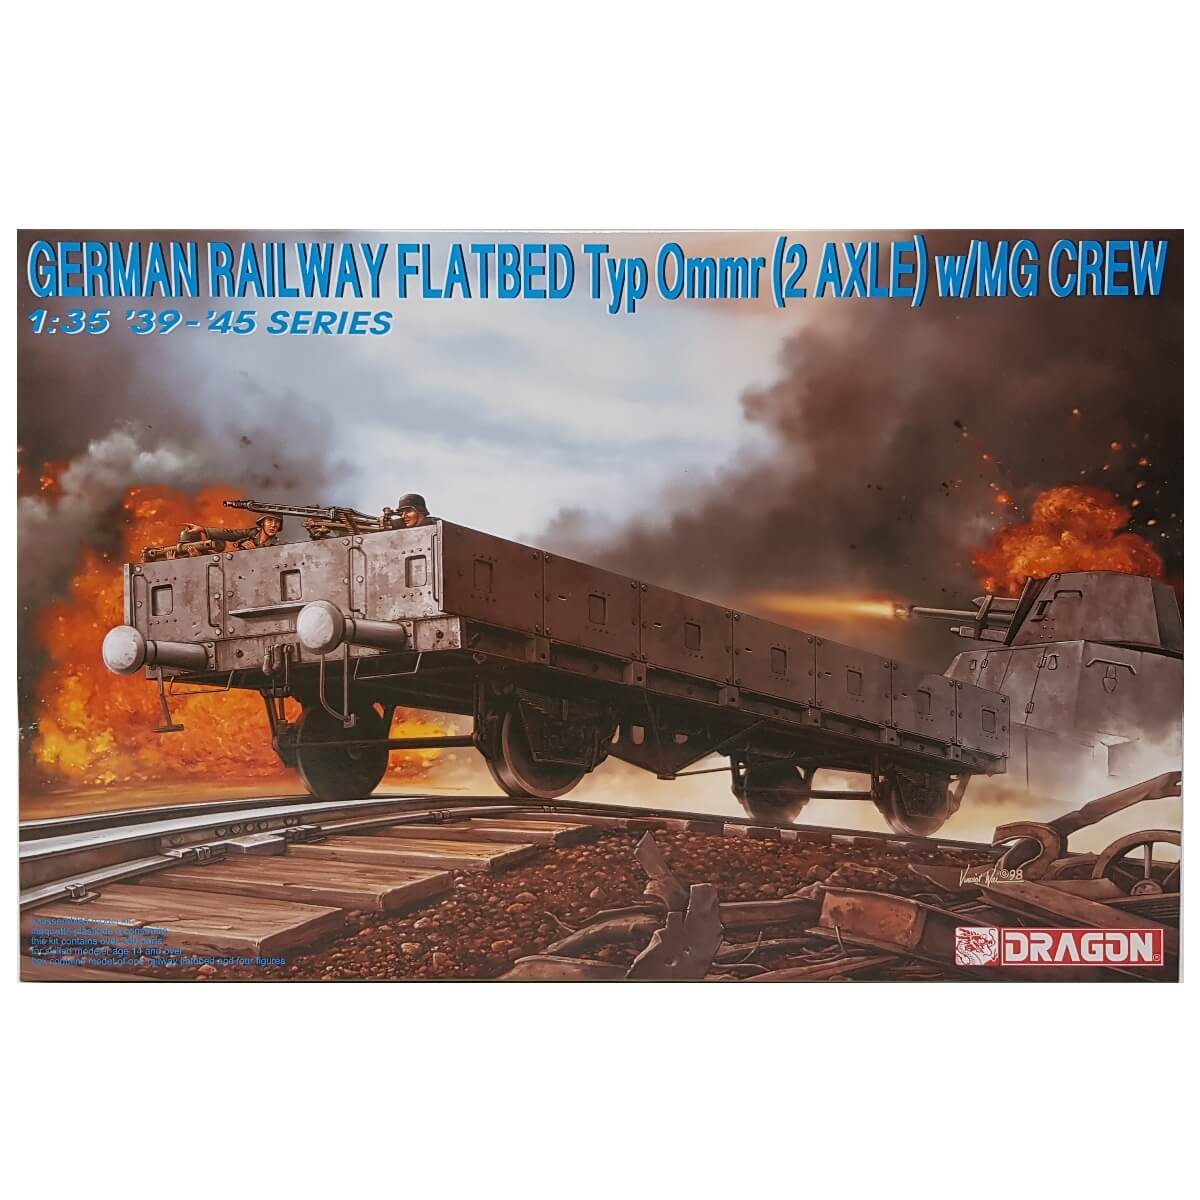 1:35 German Railway Flatbed Typ Ommr 2 Axle with MG Crew - DRAGON